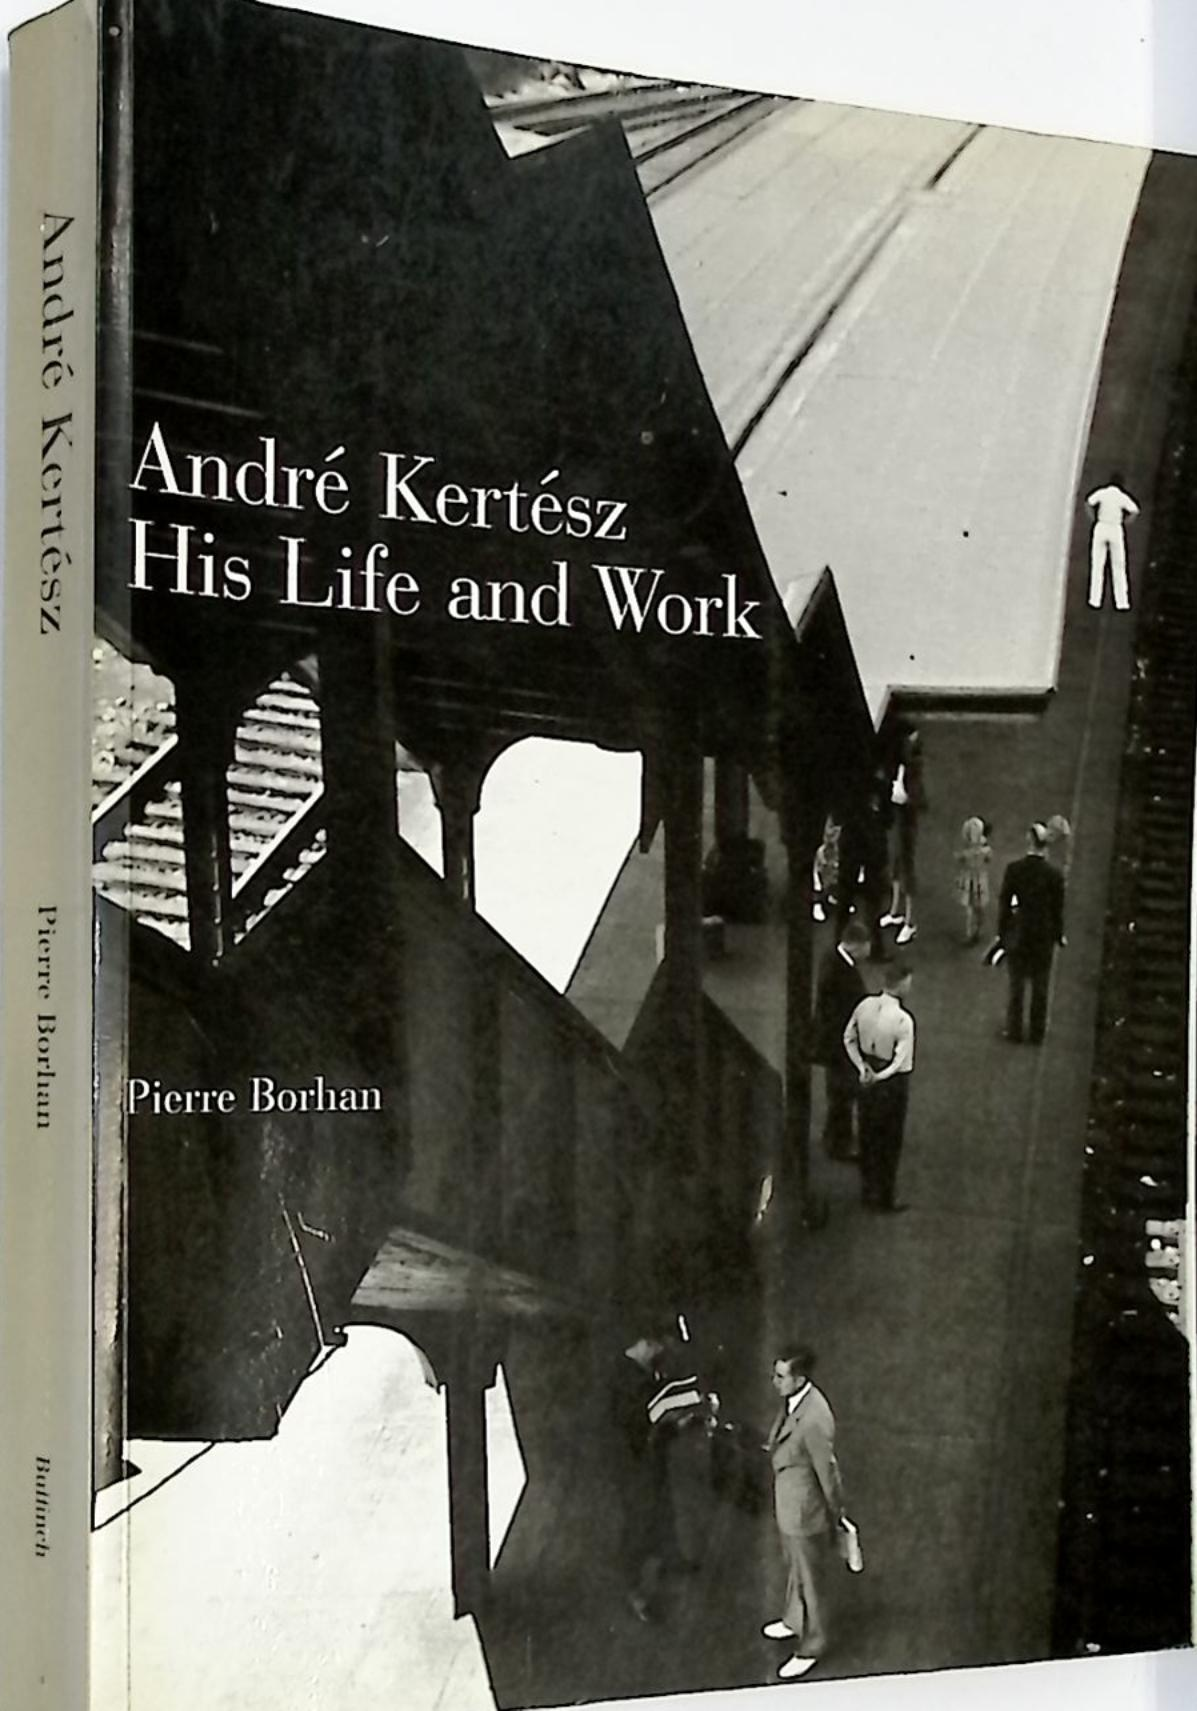 Andr Kertsz His Life and Work